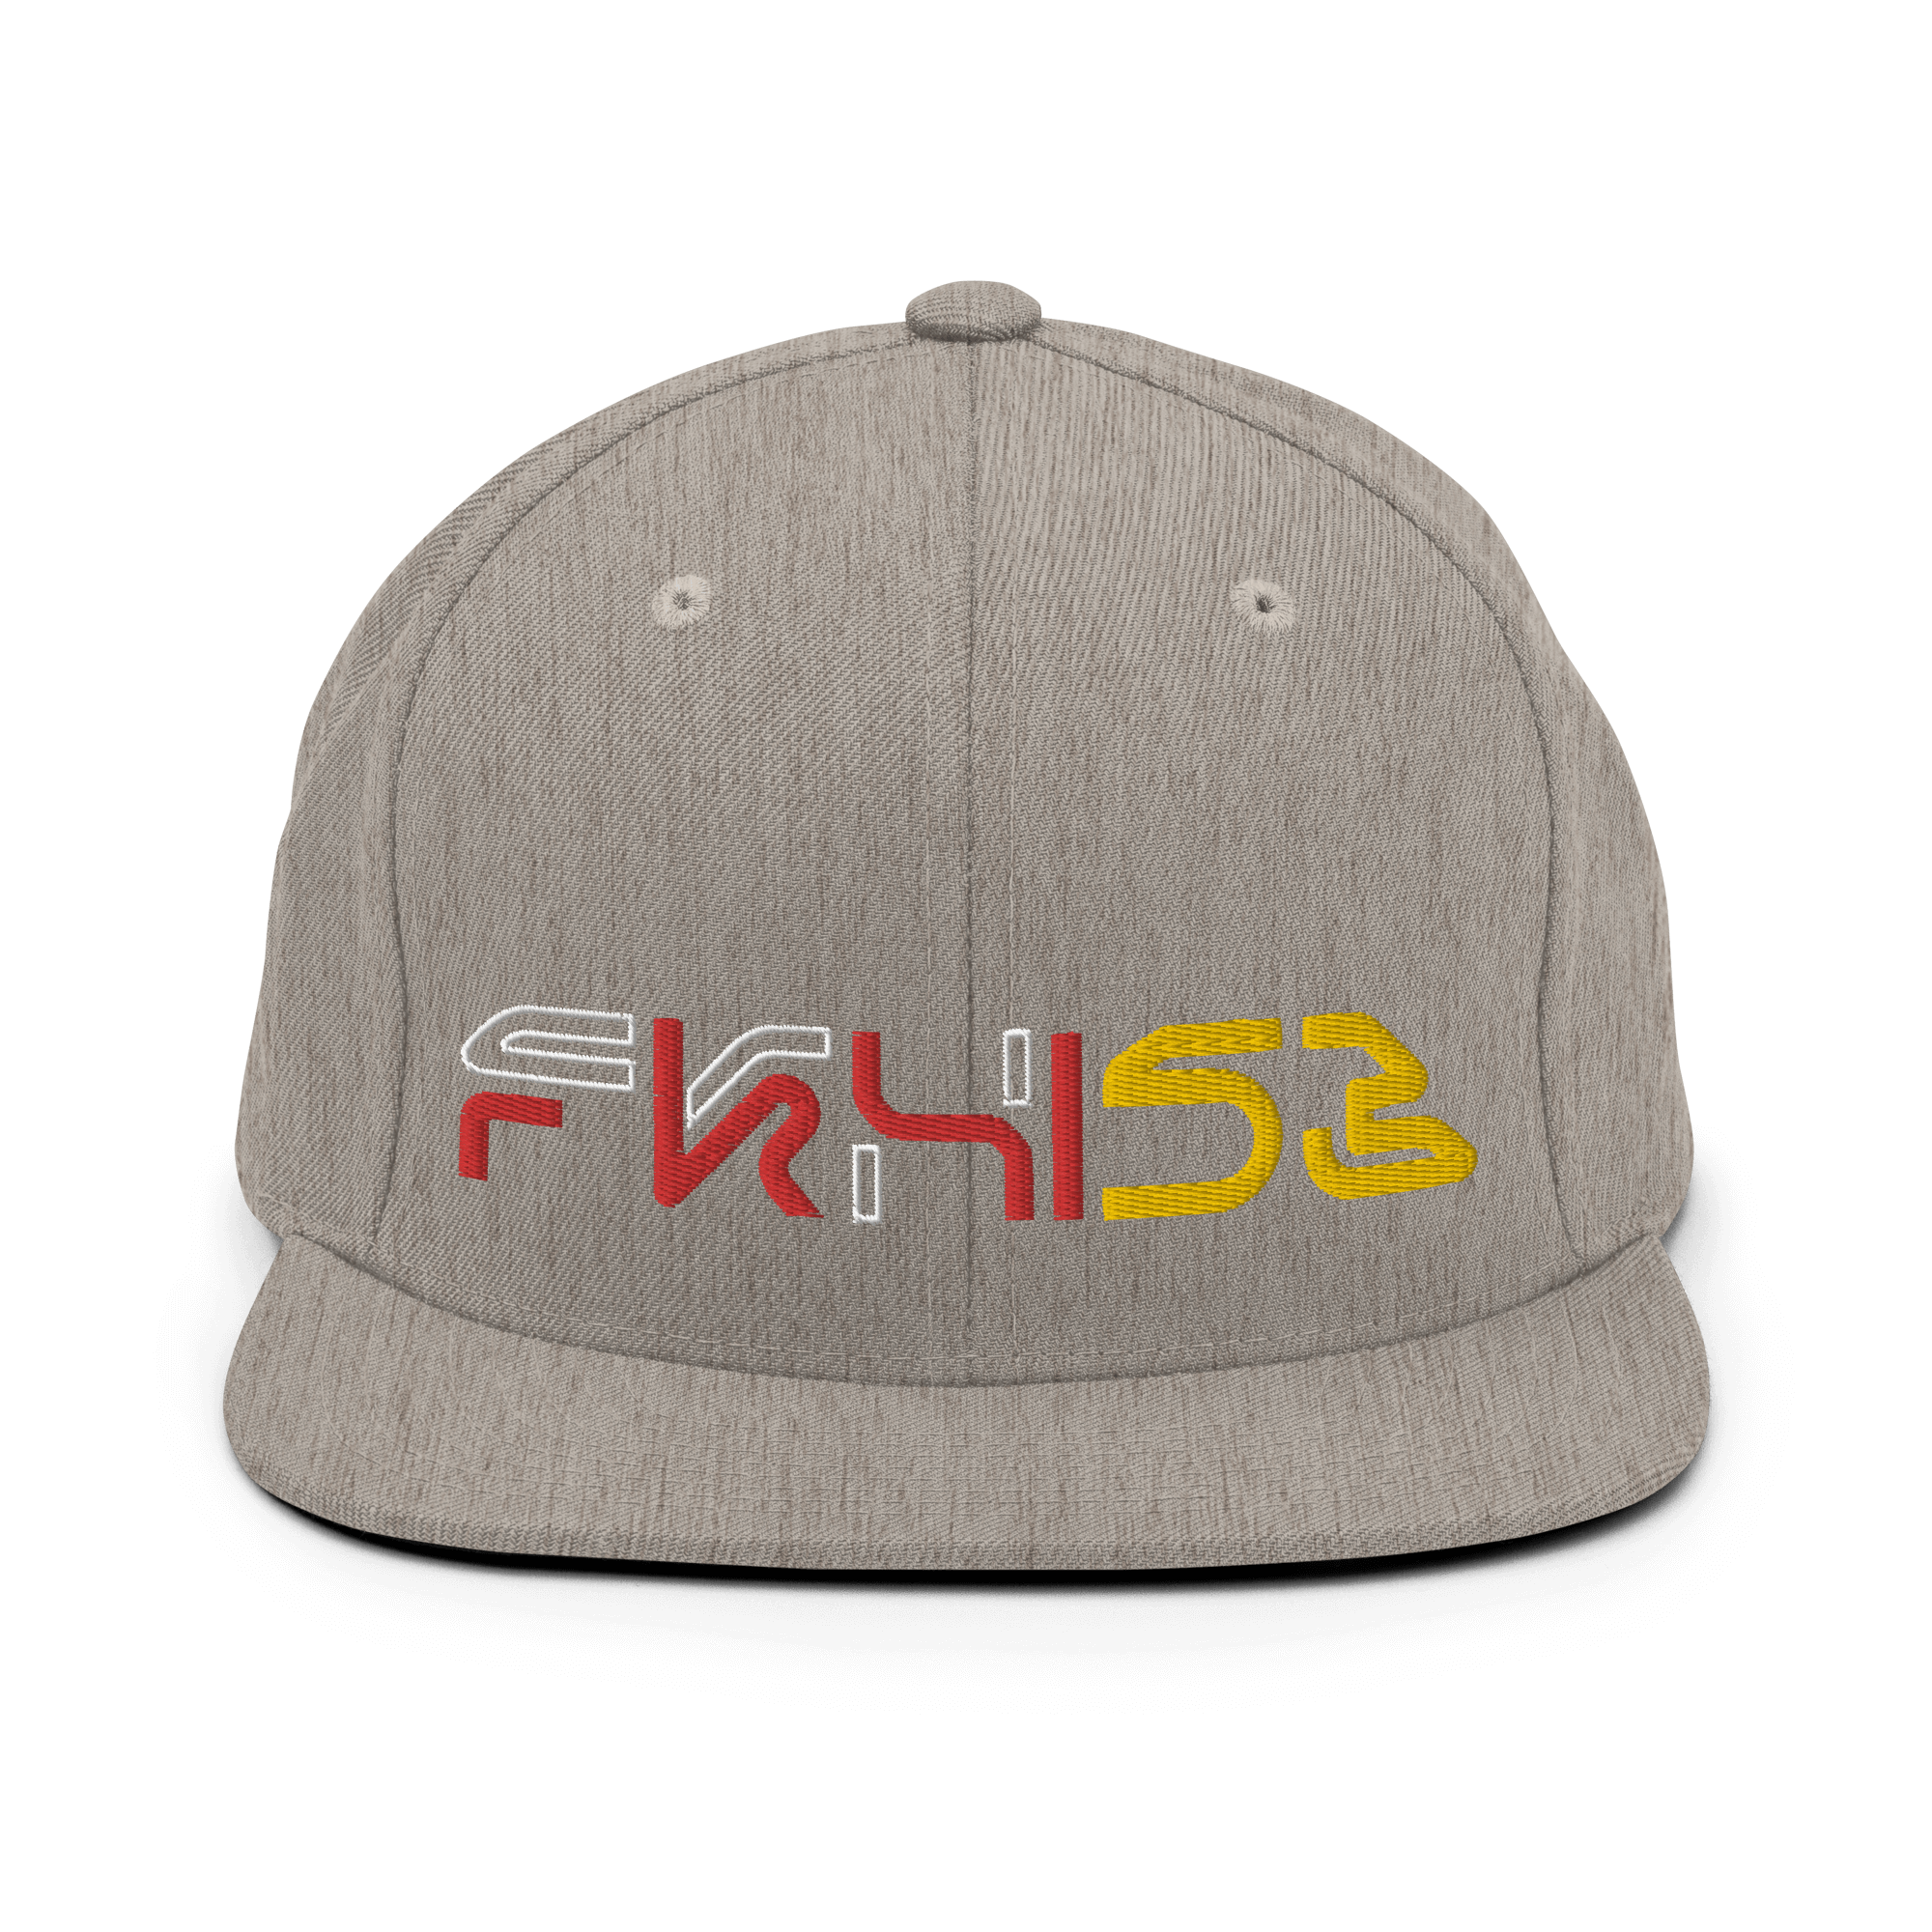 FKXI 53 Snapback CapDive into style with the FKXI 53 Snapback Cap – a classic fit, flat brim, and full buckram structure that effortlessly blends comfort and flair. The adjustable snap closure ensures a perfect fit for everyone. Crafted exclusively for yo